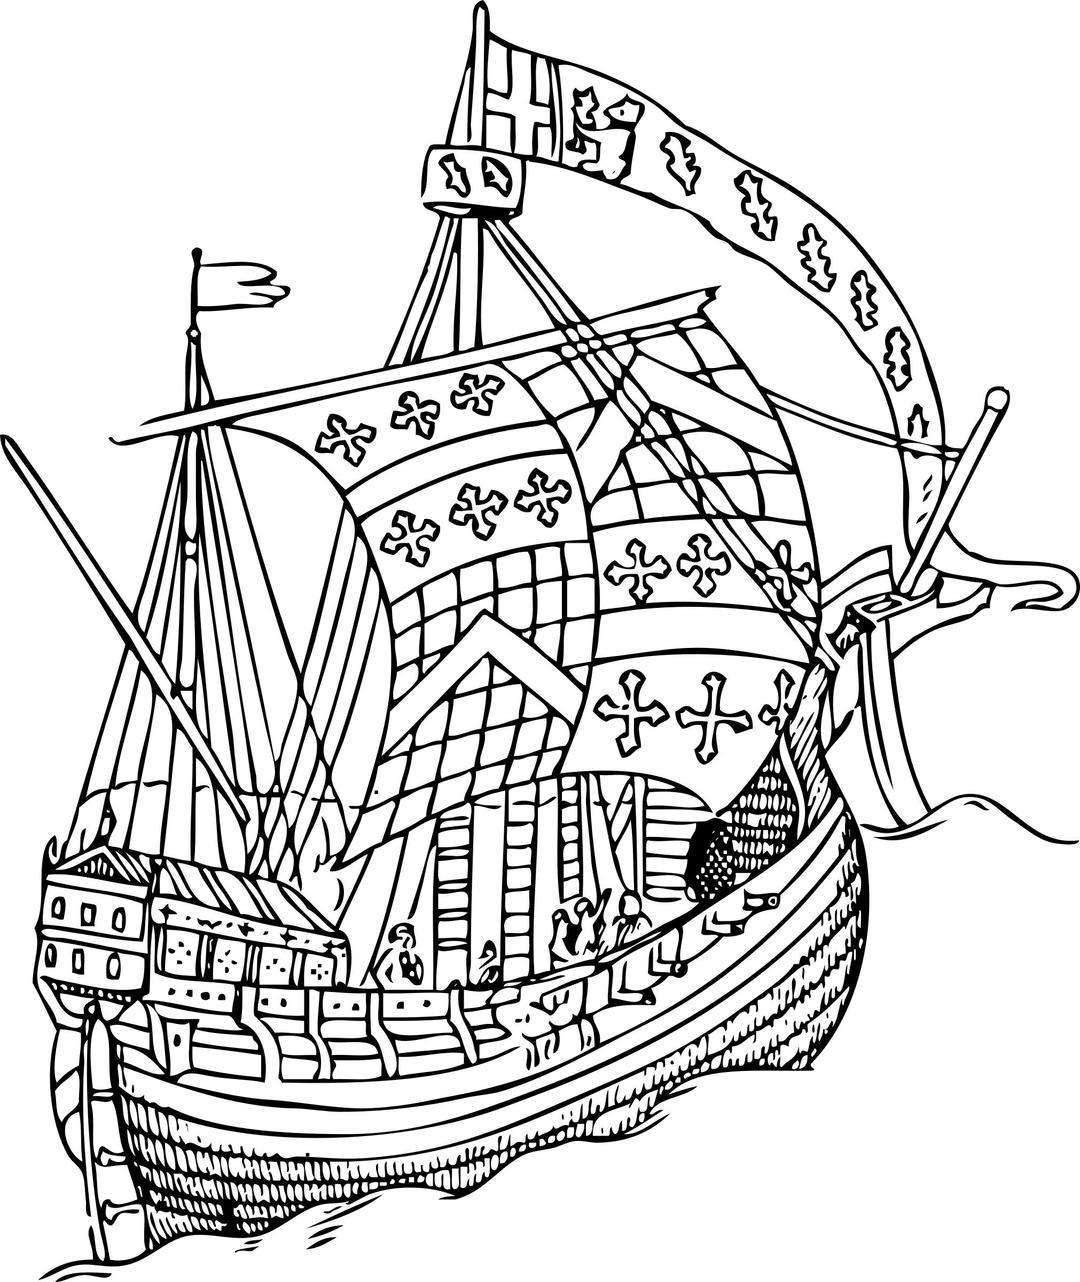 ship from the mid-15th century png transparent